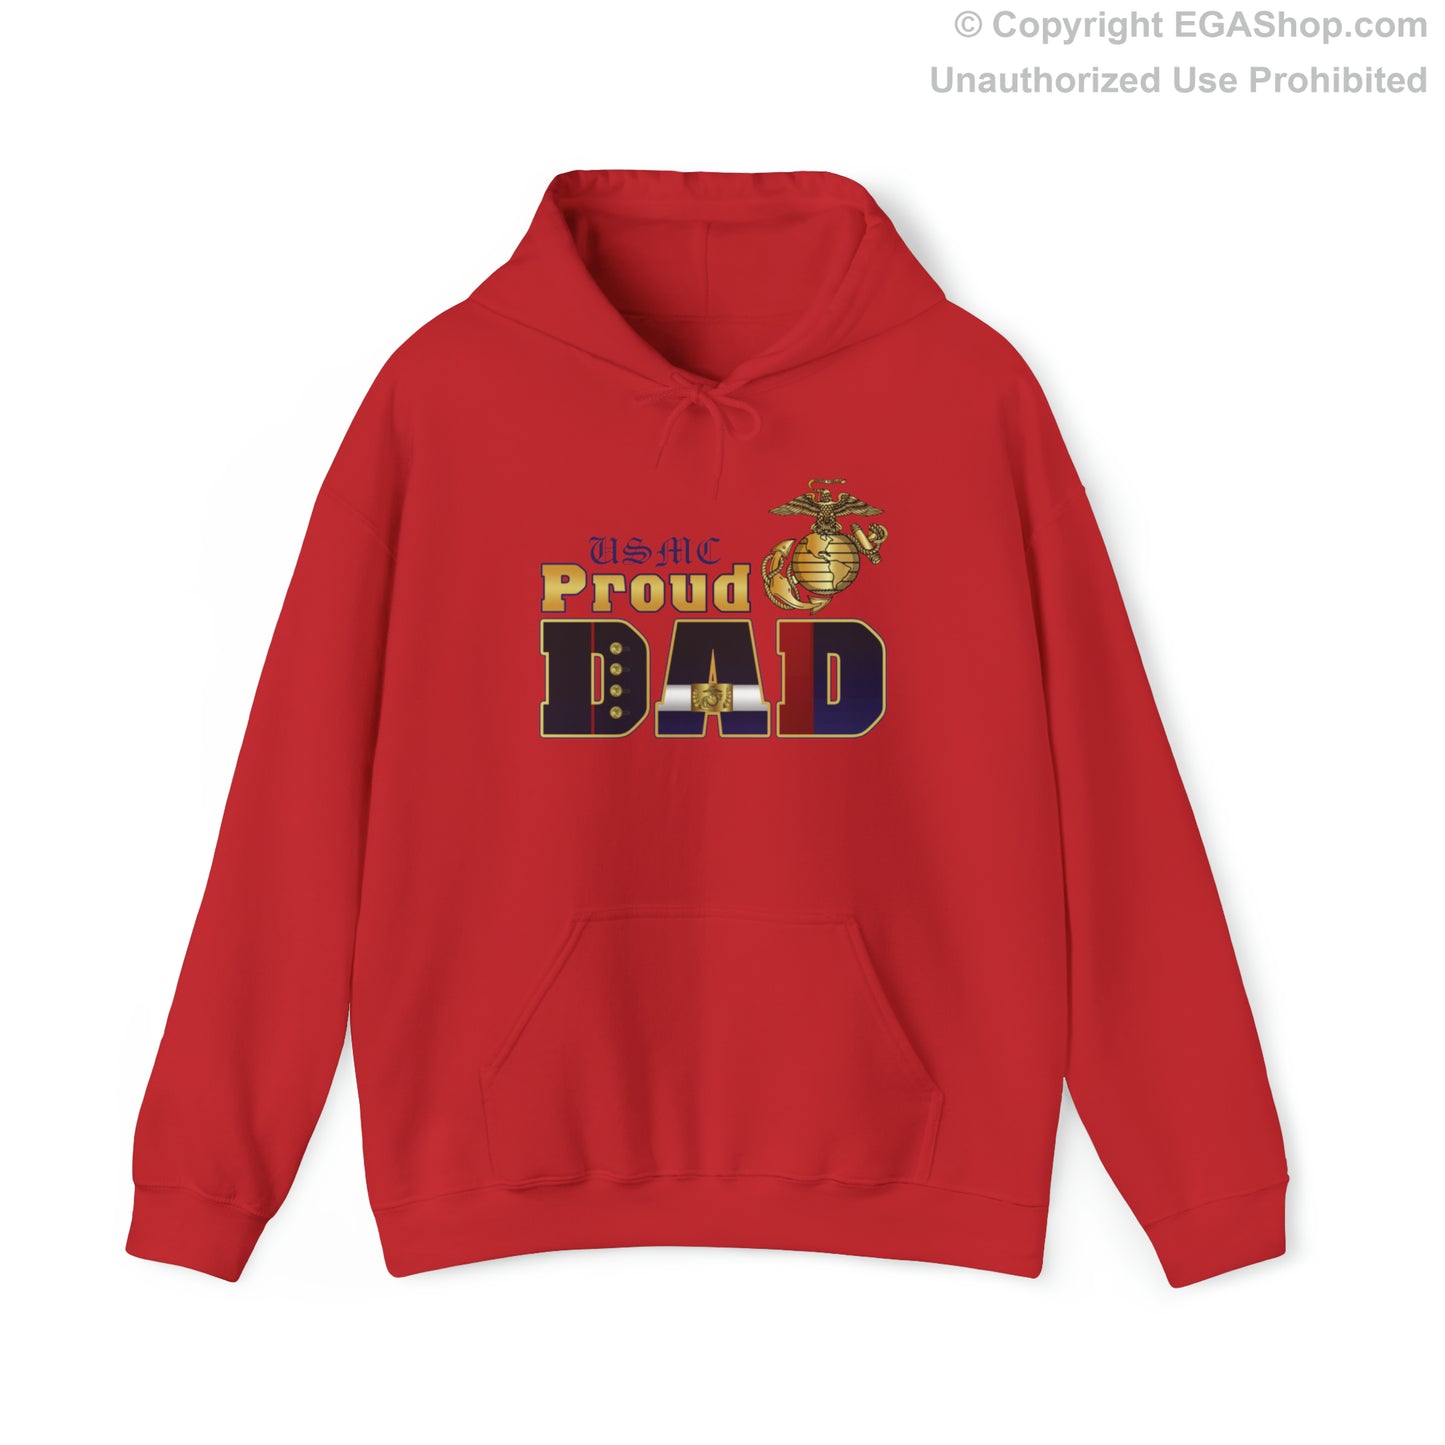 Hoodie: Dress Blue Proud Dad (Your Choice of Colors)